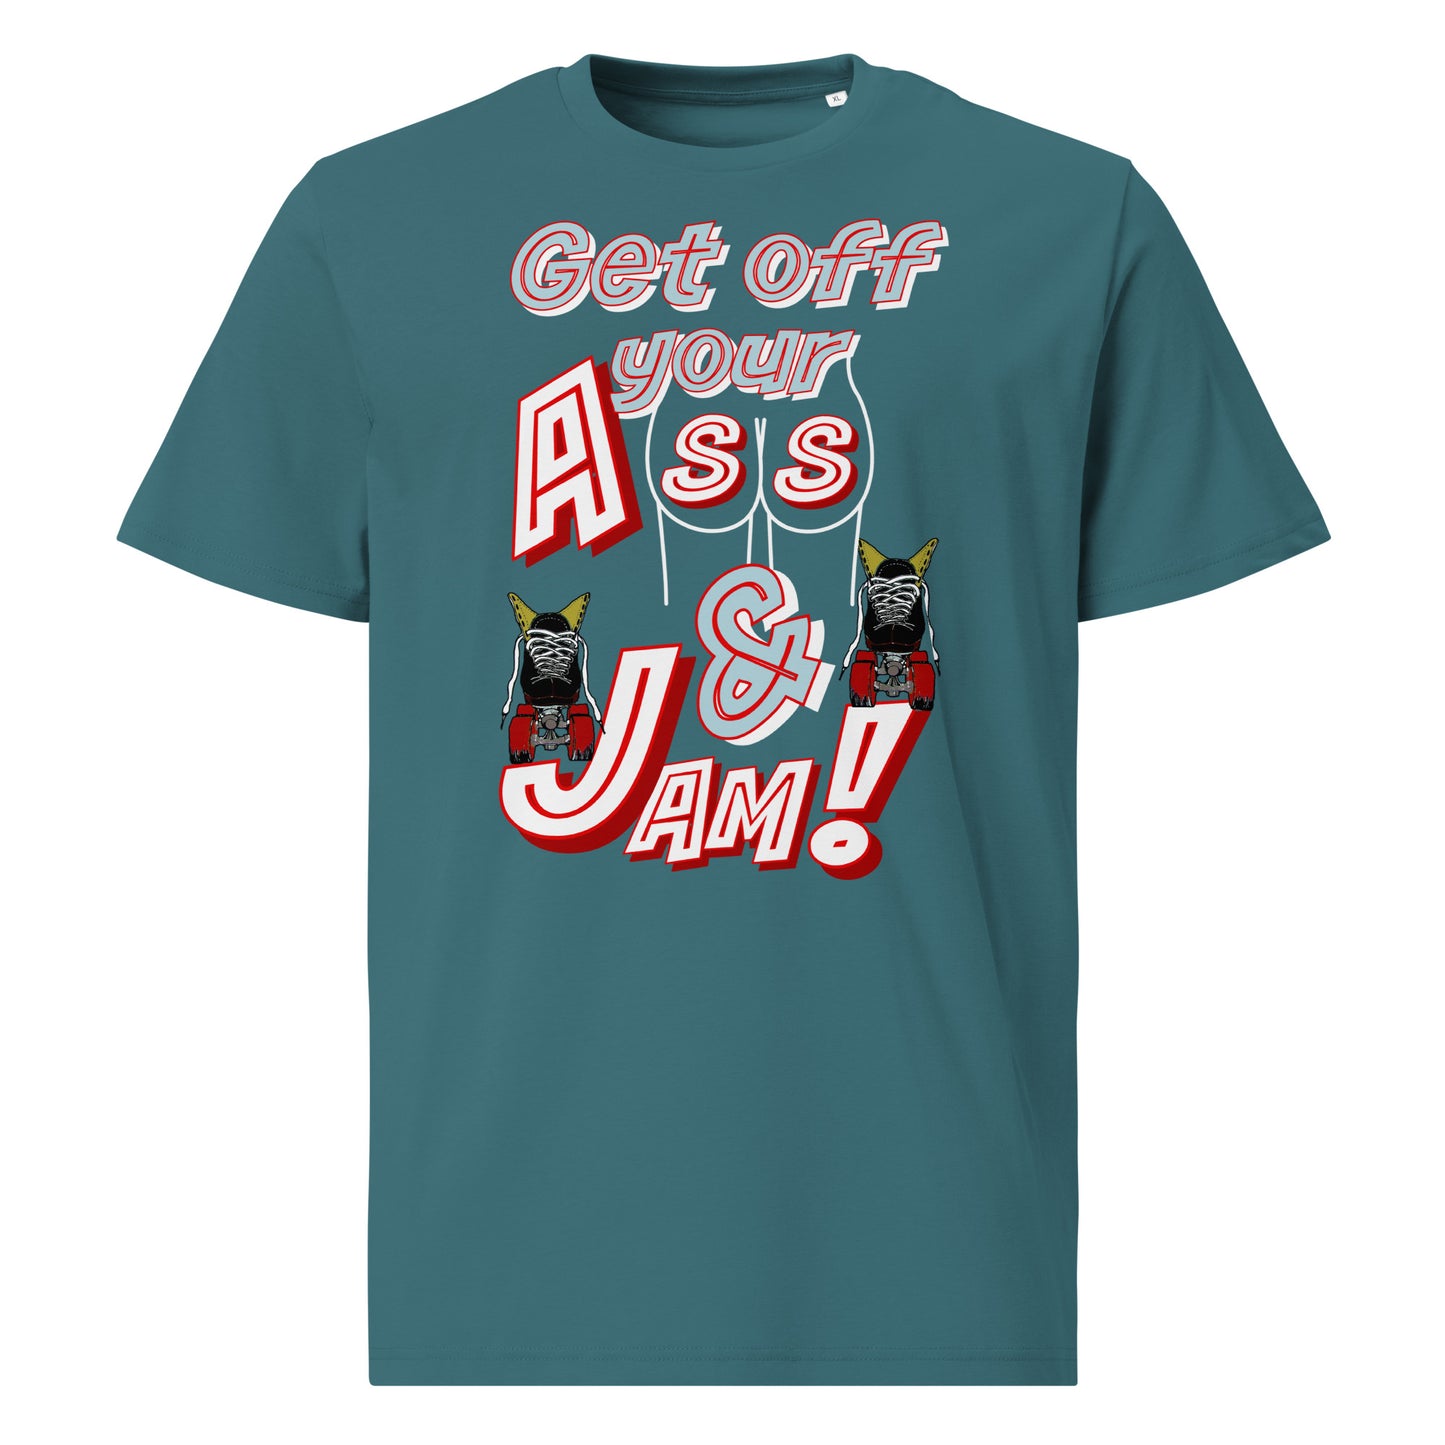 Tshirt Get of your A$$ & Jam!